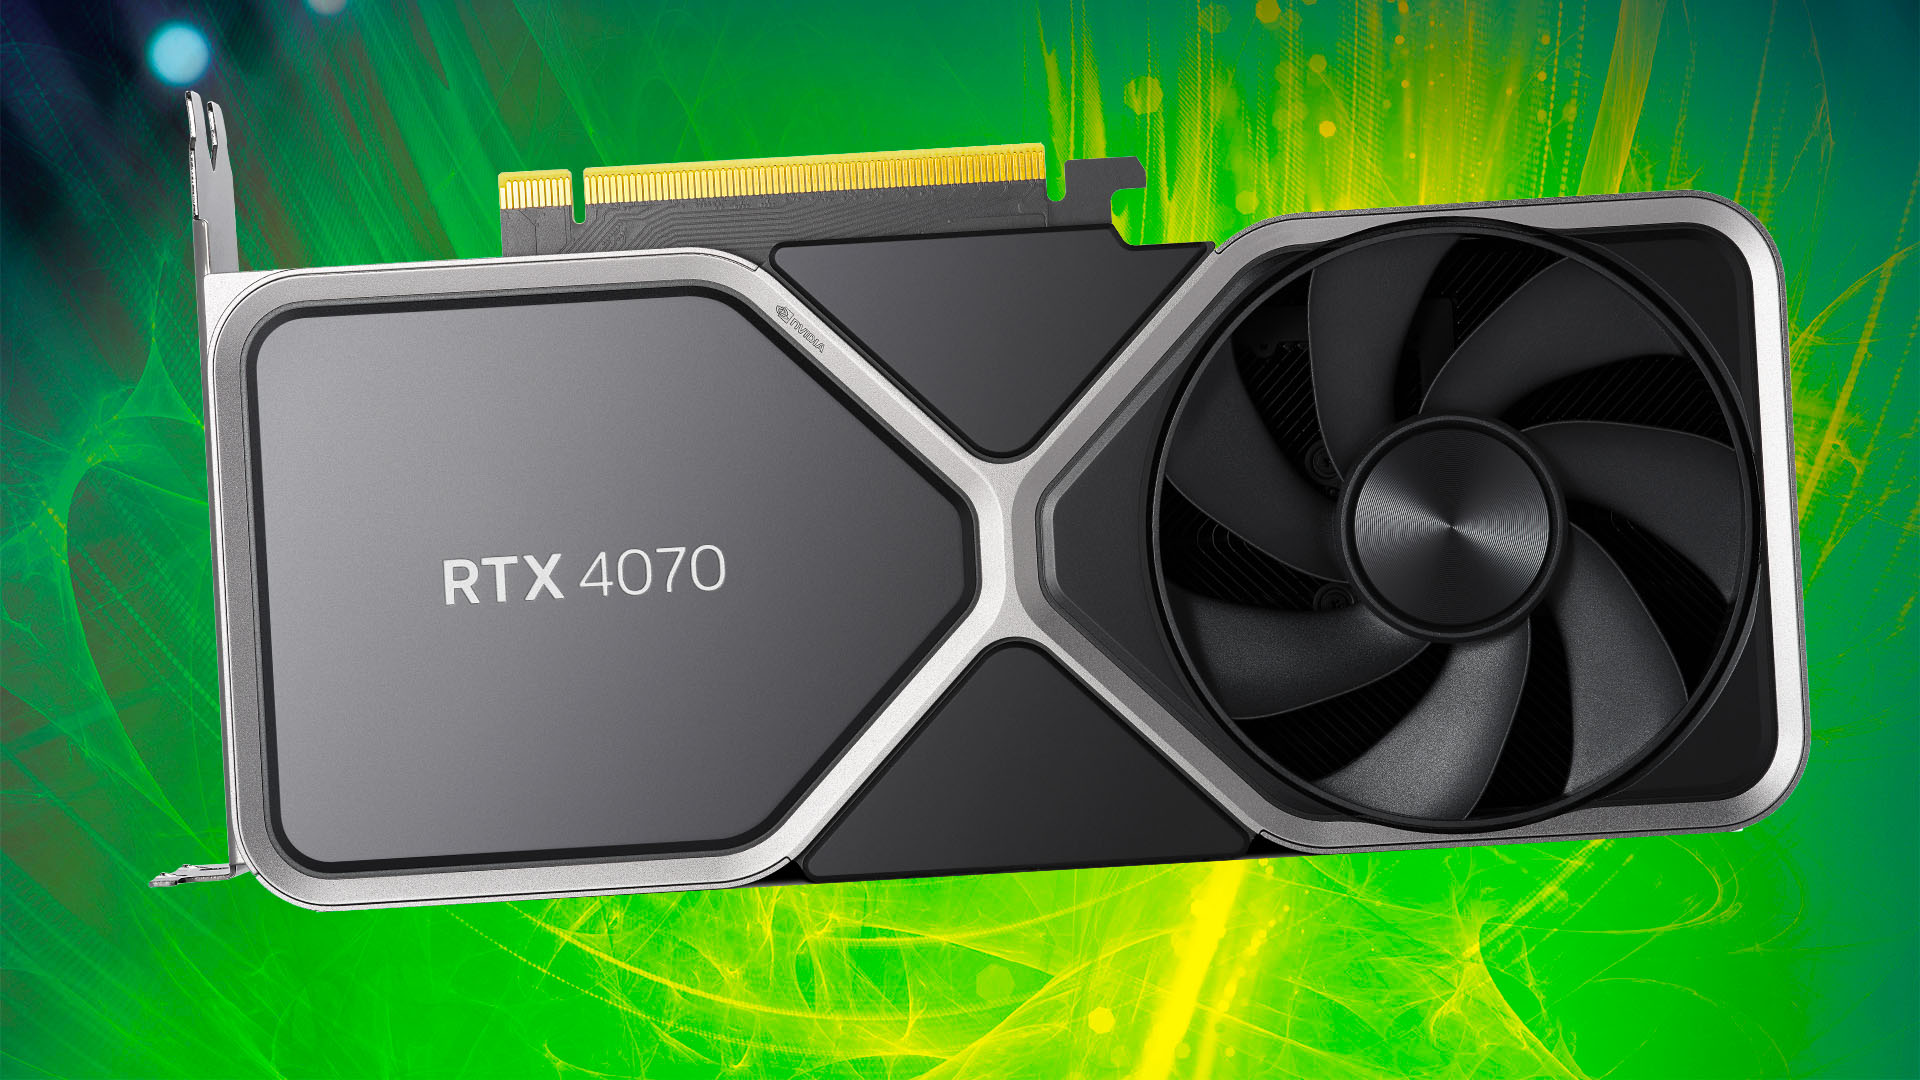 Best graphics card: Nvidia GeForce RTX 4070 on green background